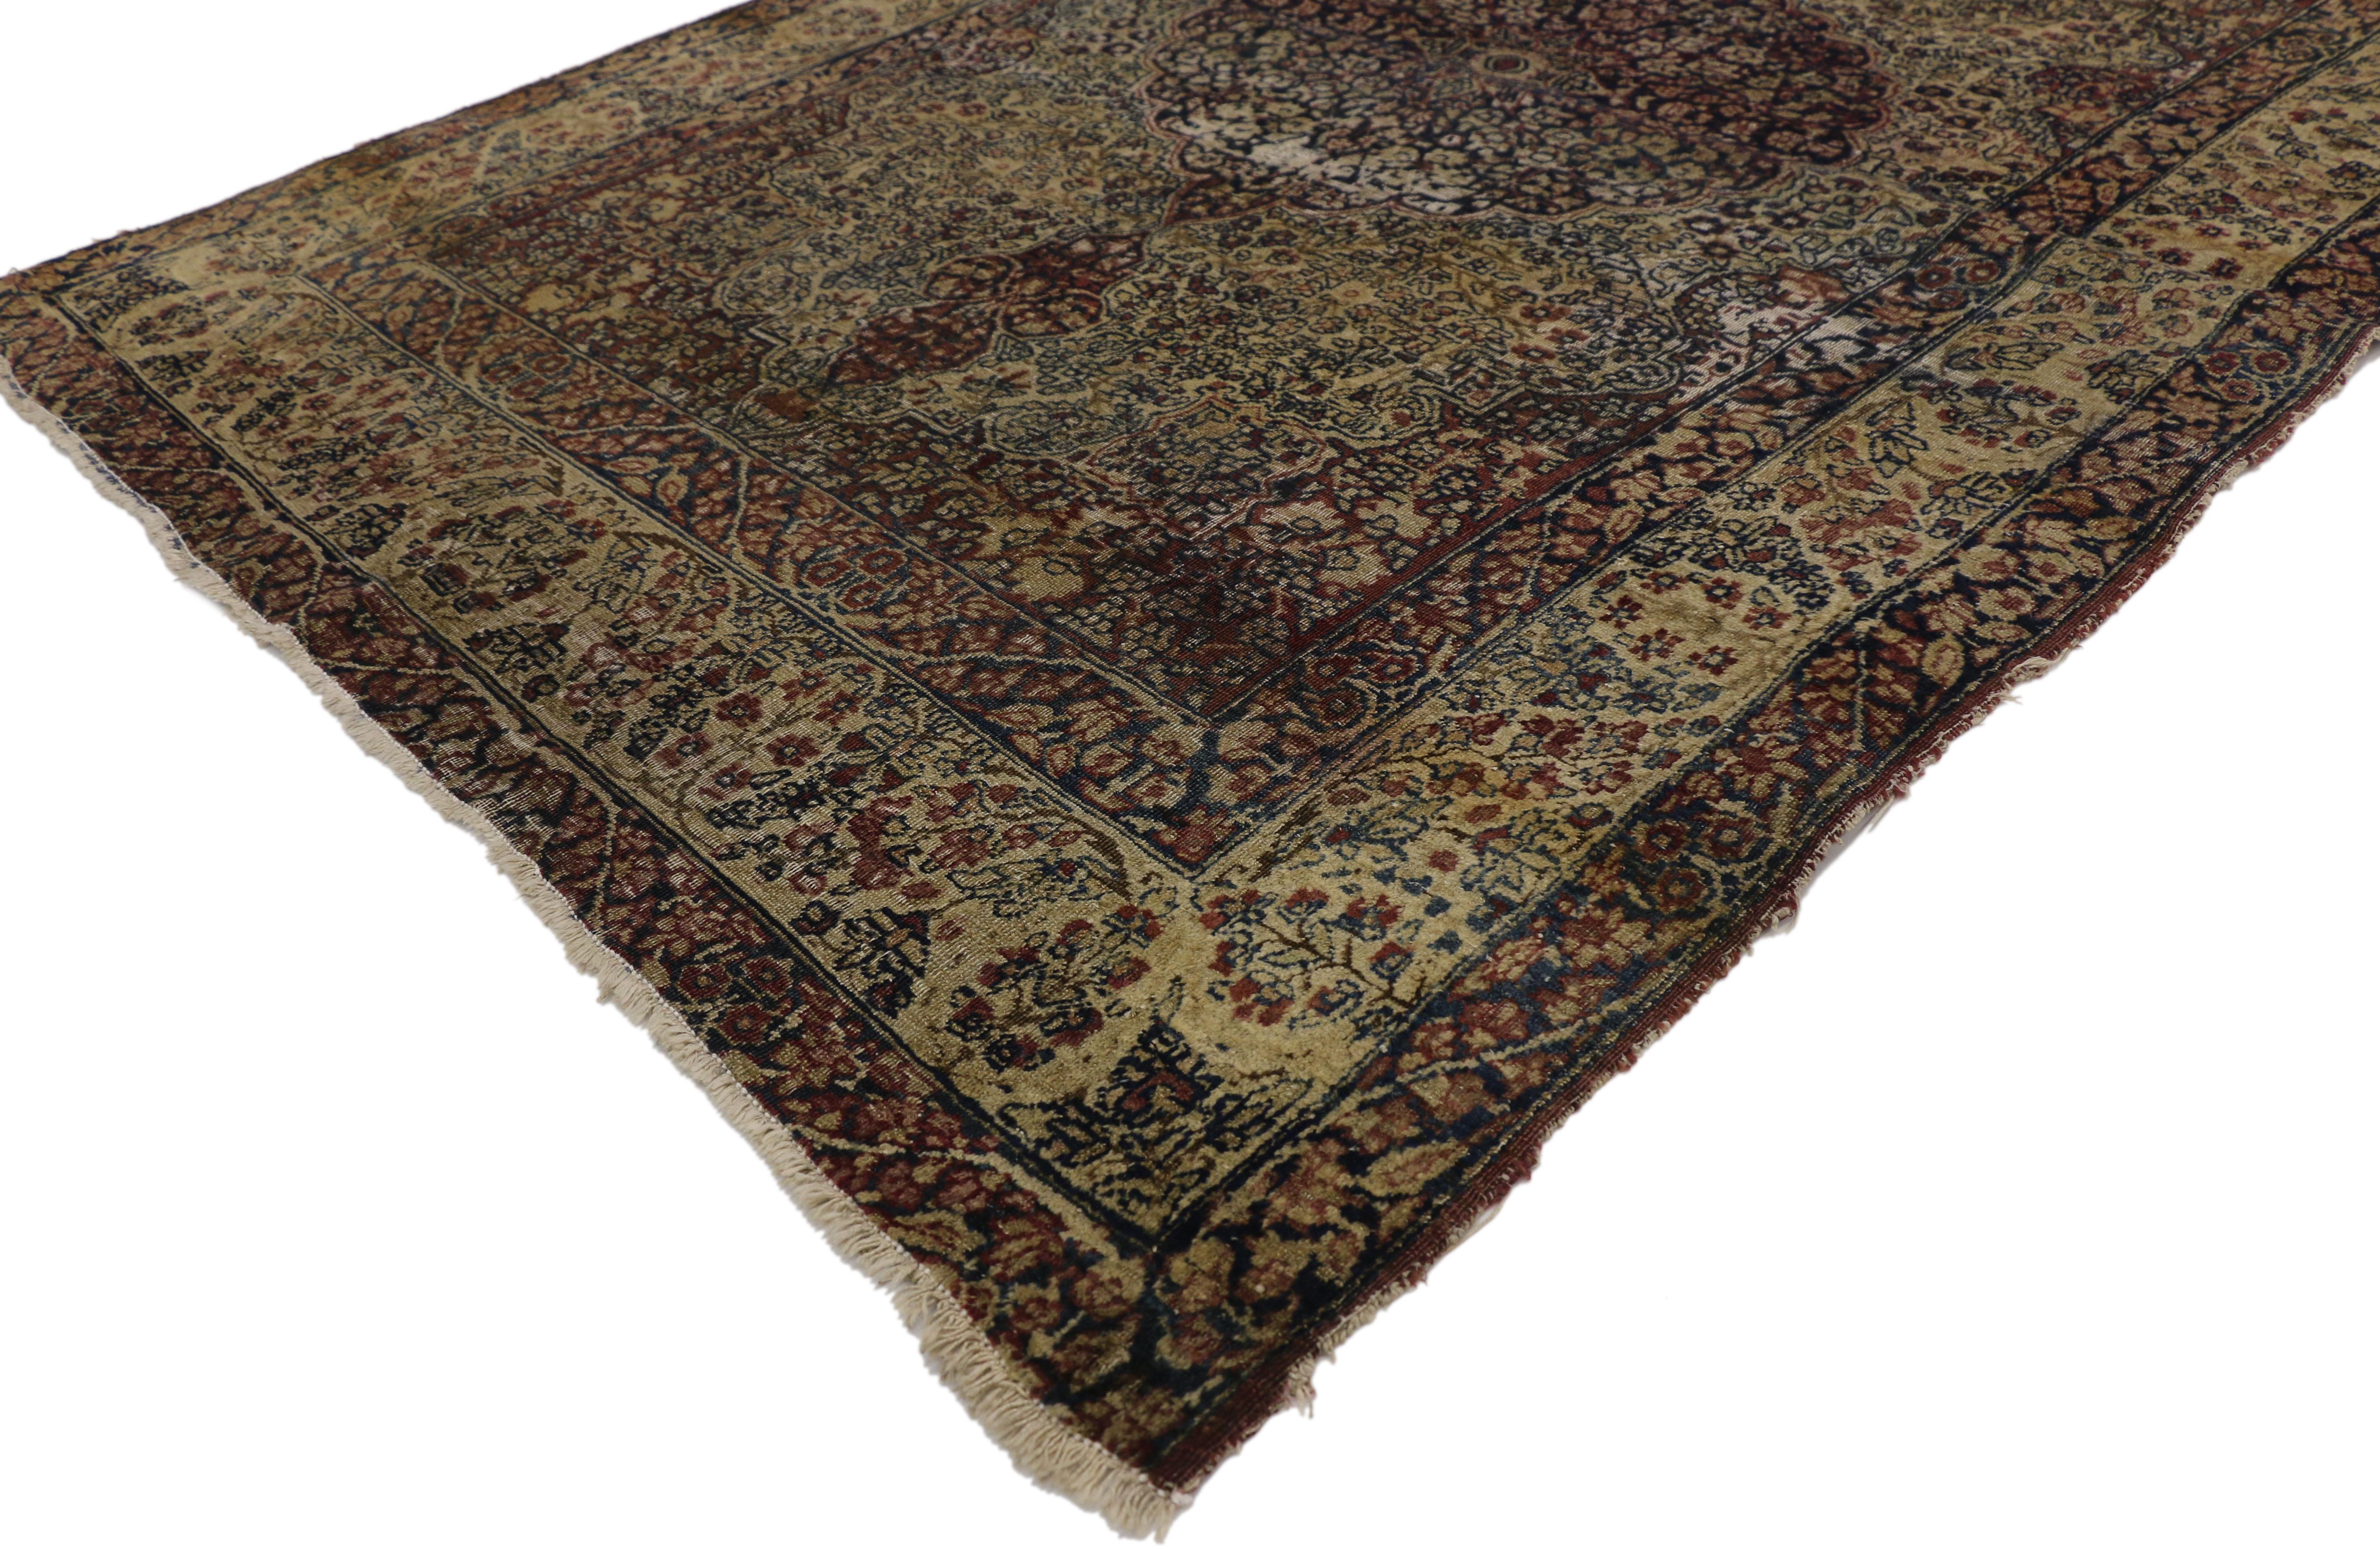 73167 Late 19th Century Distressed Antique Kermanshah Persian Rug with Rustic English Style 04'02 x 06'00. Balancing a timeless floral design with traditional sensibility and a lovingly timeworn patina, this hand knotted wool distressed antique